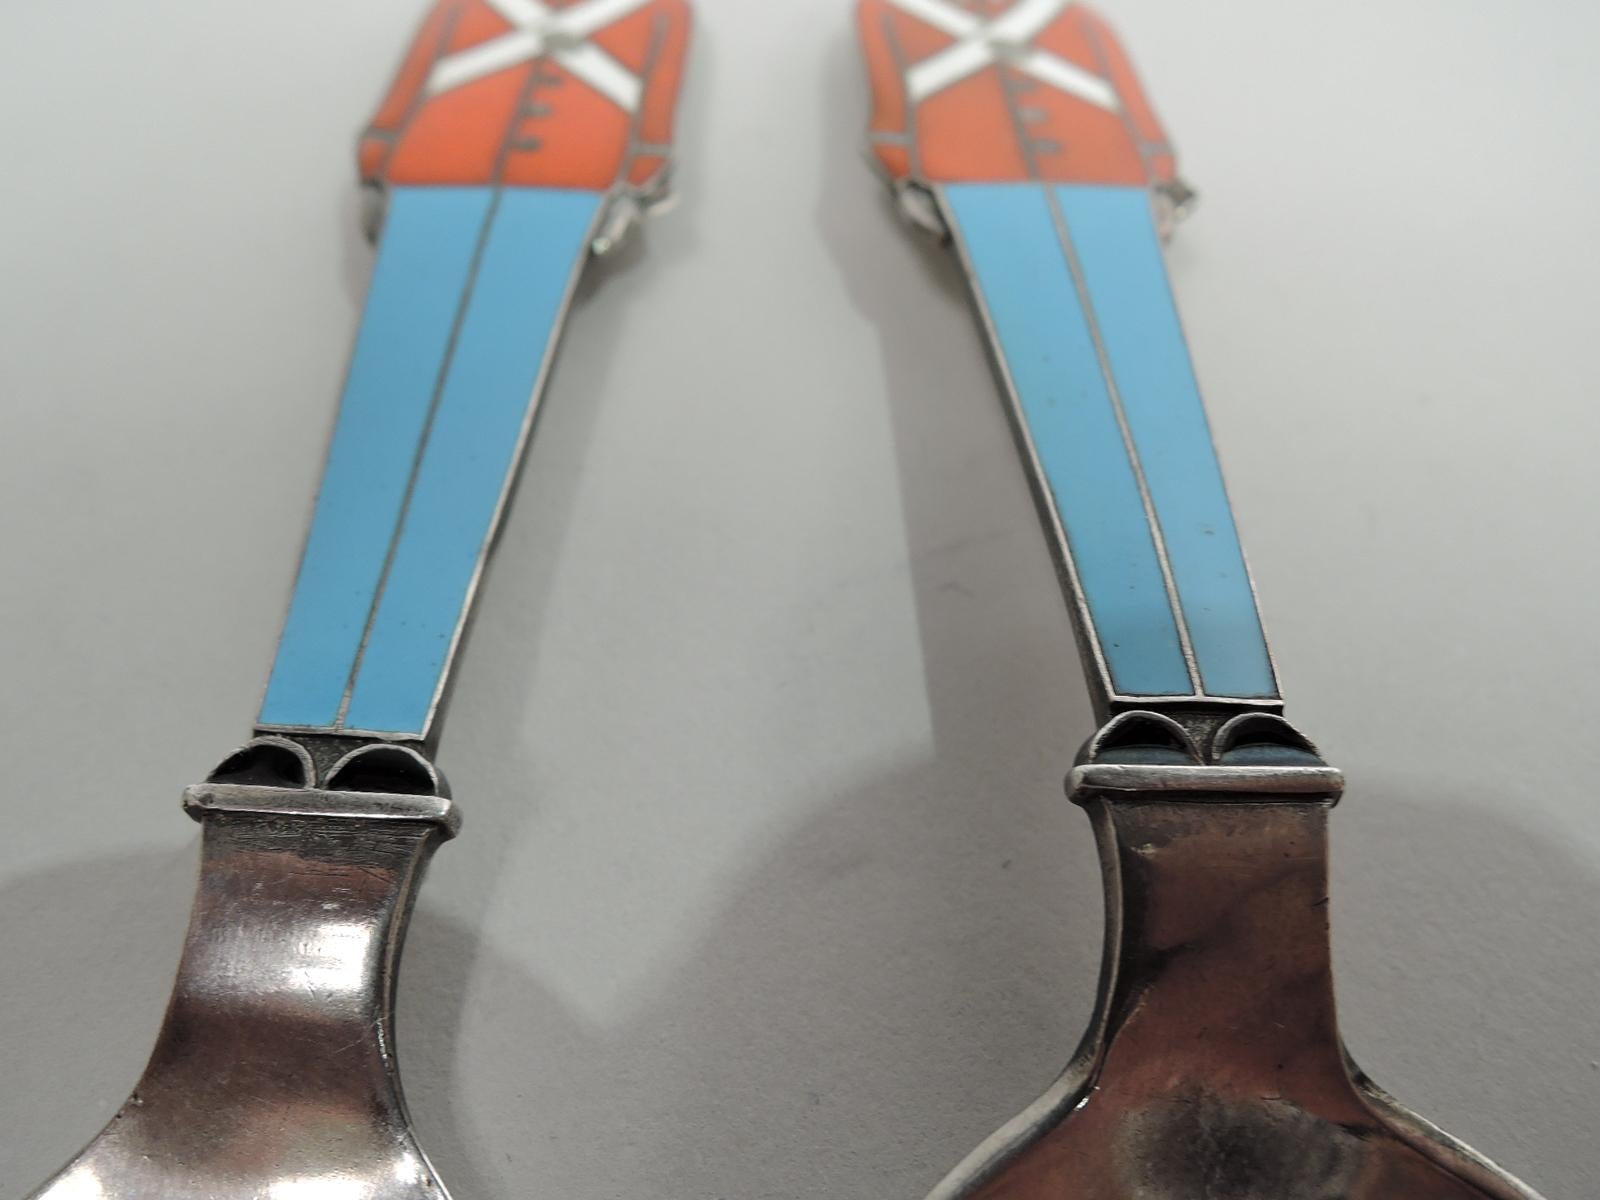 Novelty sterling silver youth set comprising fork and spoon. Each: Flat and figural with enameled royal guardsman terminating in bearskin. Traditional sentries to ensure a clean plate. Back plain. Fork has 4 tines and spoon has oval bowl. Fully